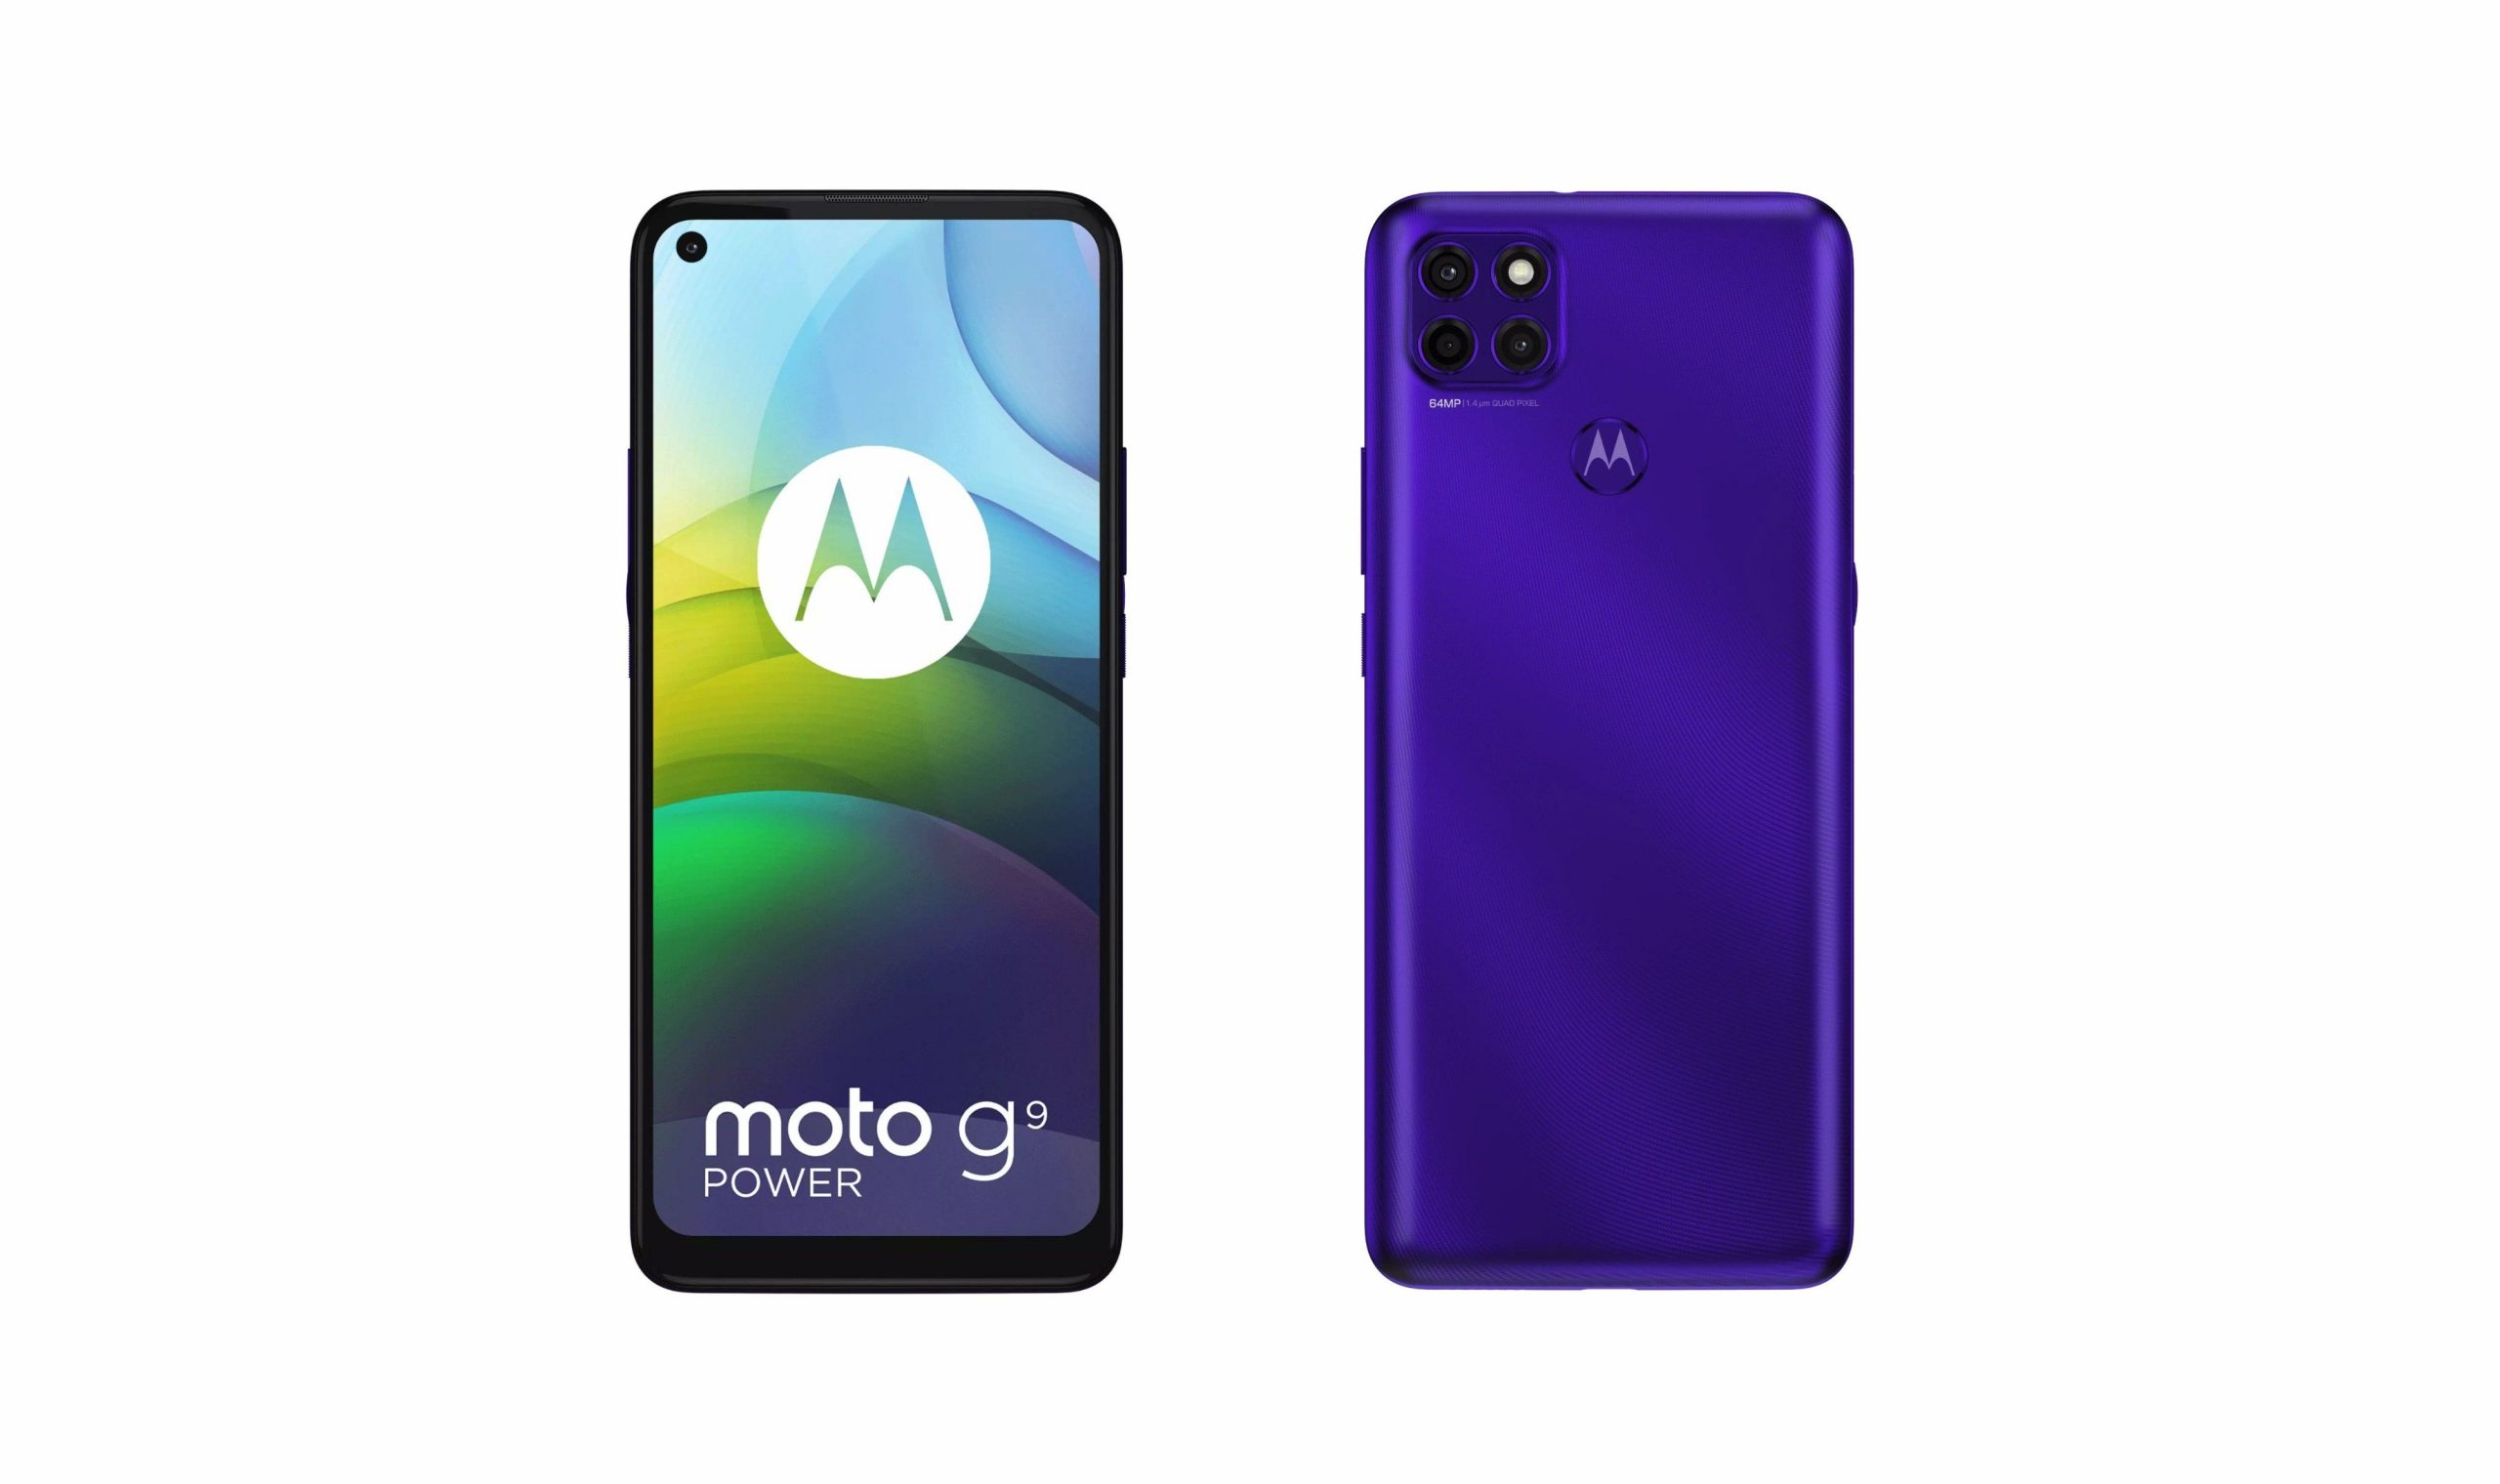 Motorola Moto G9 Power goes official with 6000mAh battery, 20W charging & more